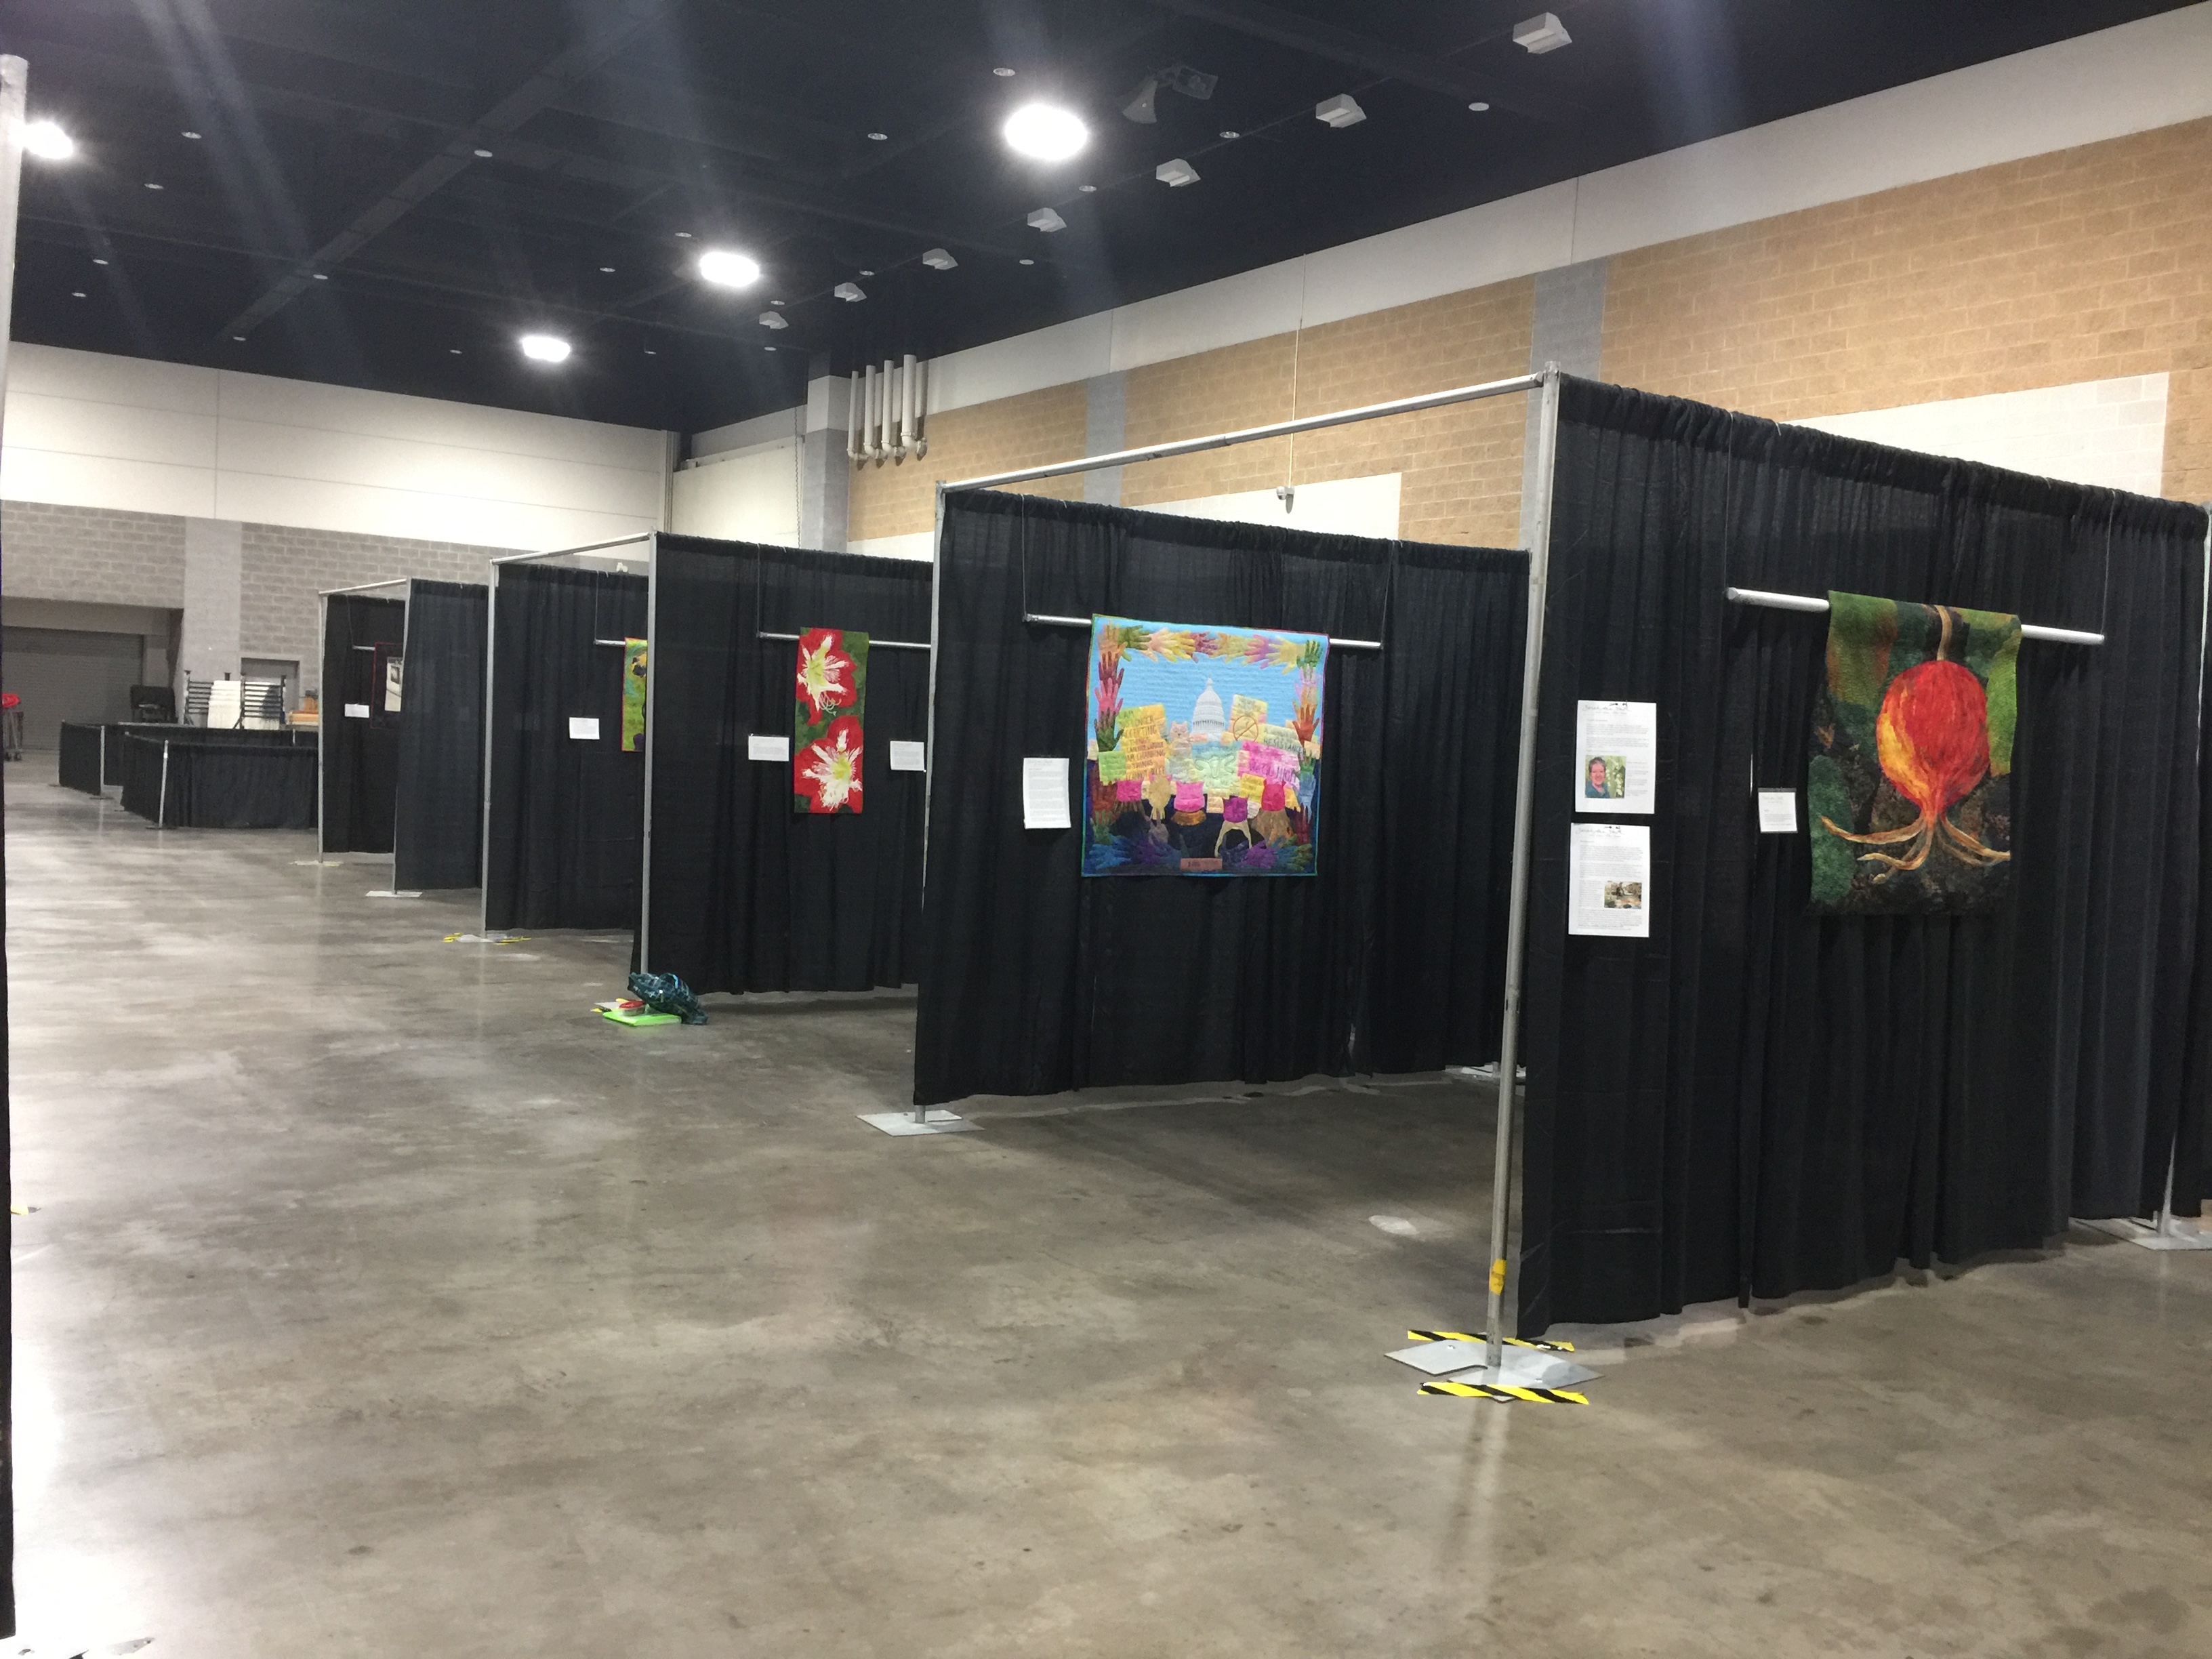 The Art of Sarah Ann Smith...so far, a solo exhibit at the 2019 World Quilt New England show